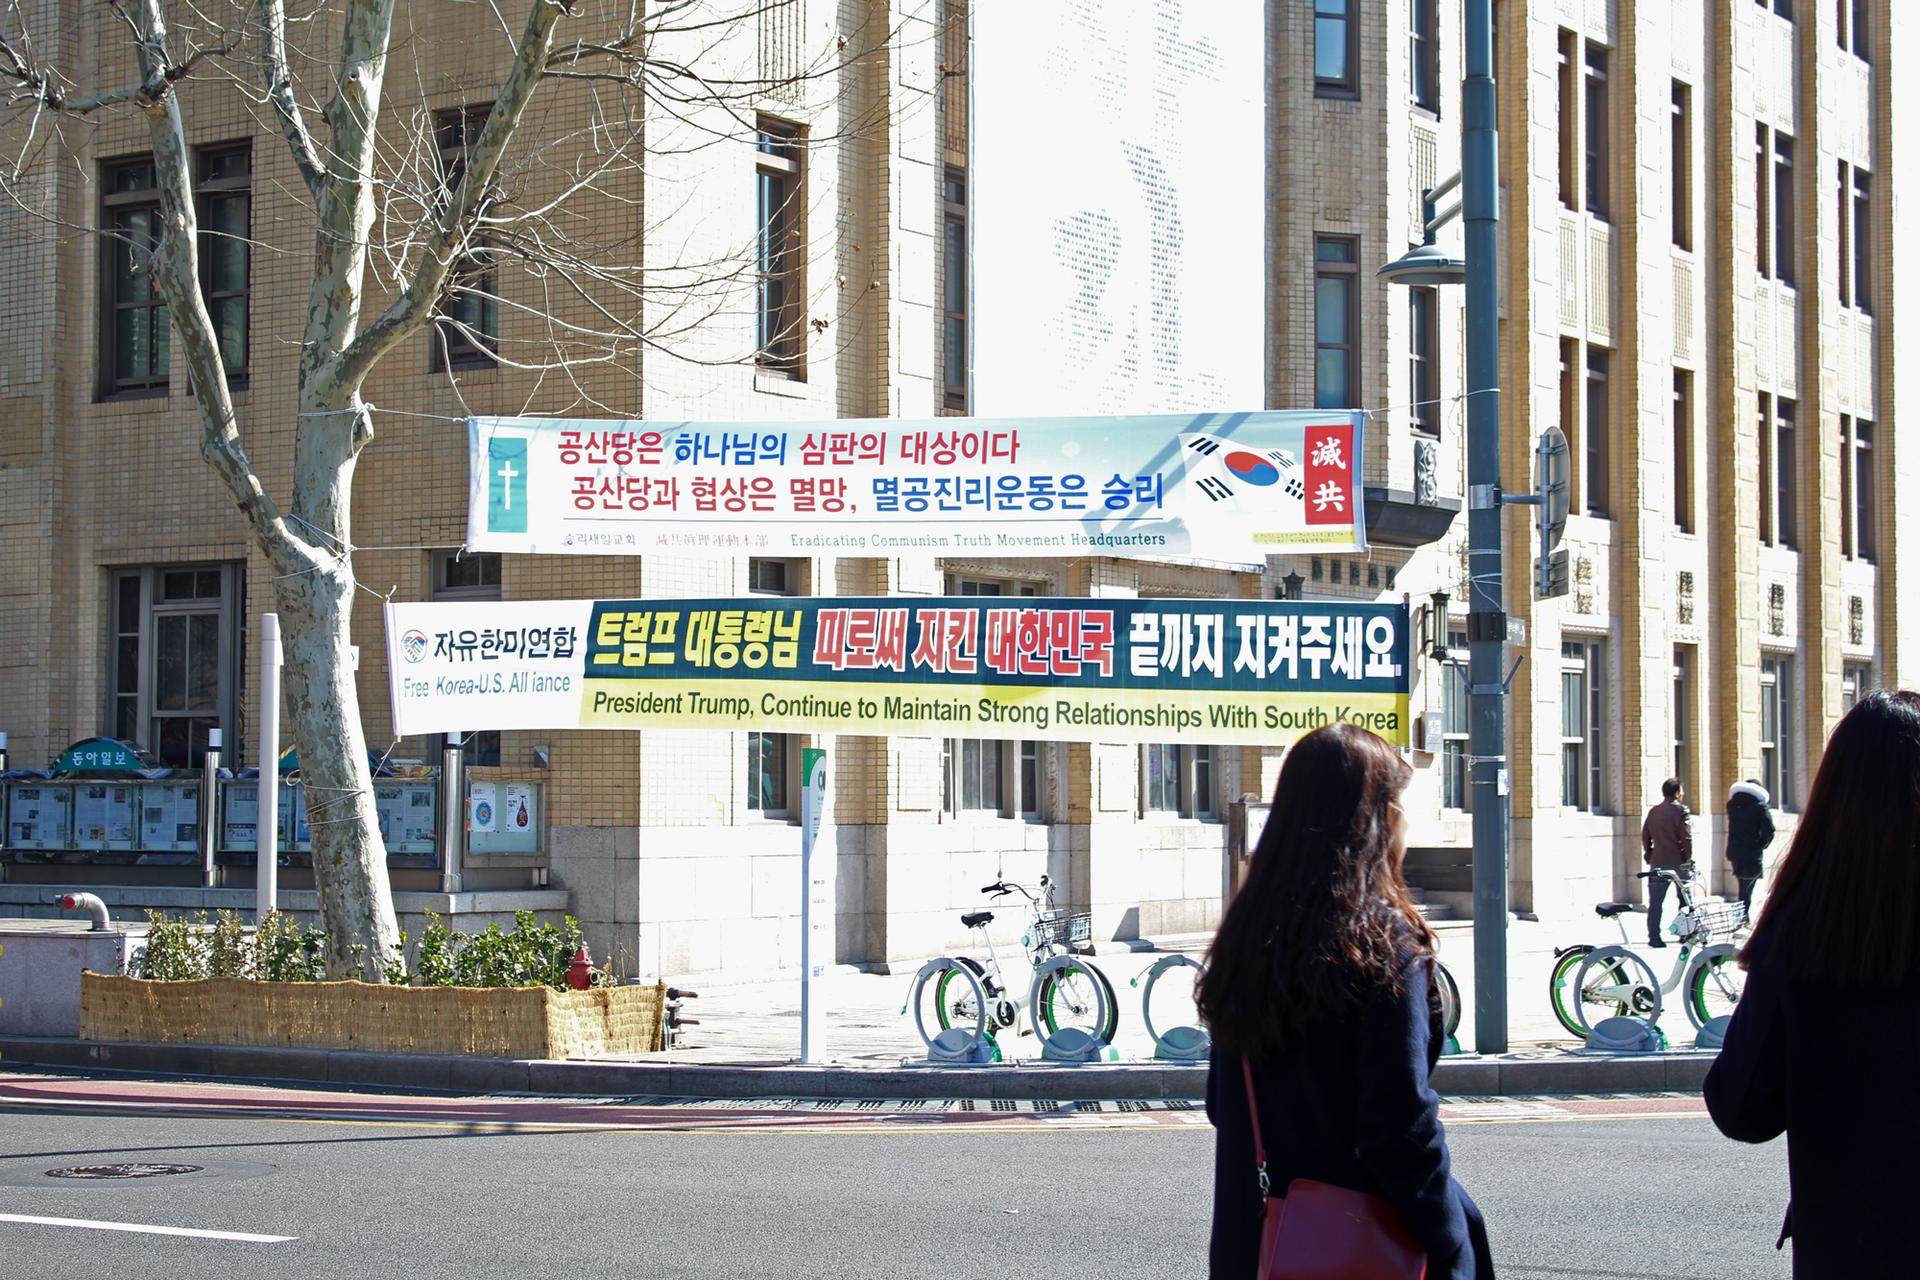 Banner with Korean language sending message to Donald Trump to maintain good relations with South Korea.